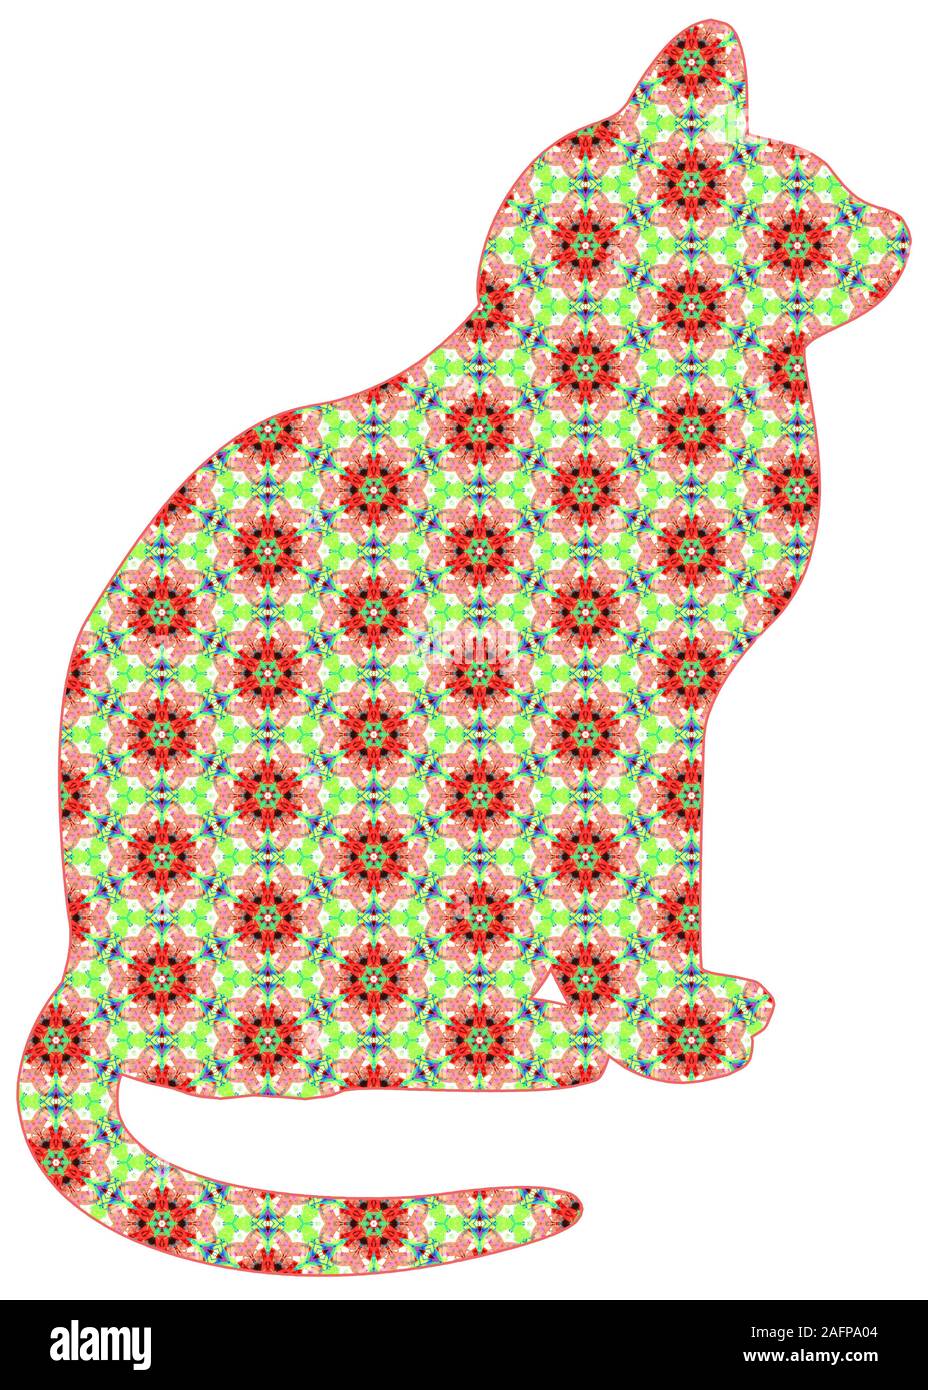 Red and green patterned Christmas cat for the holiday season, a quirky and fun artistic graphic design resource cut out isolated on white Stock Photo